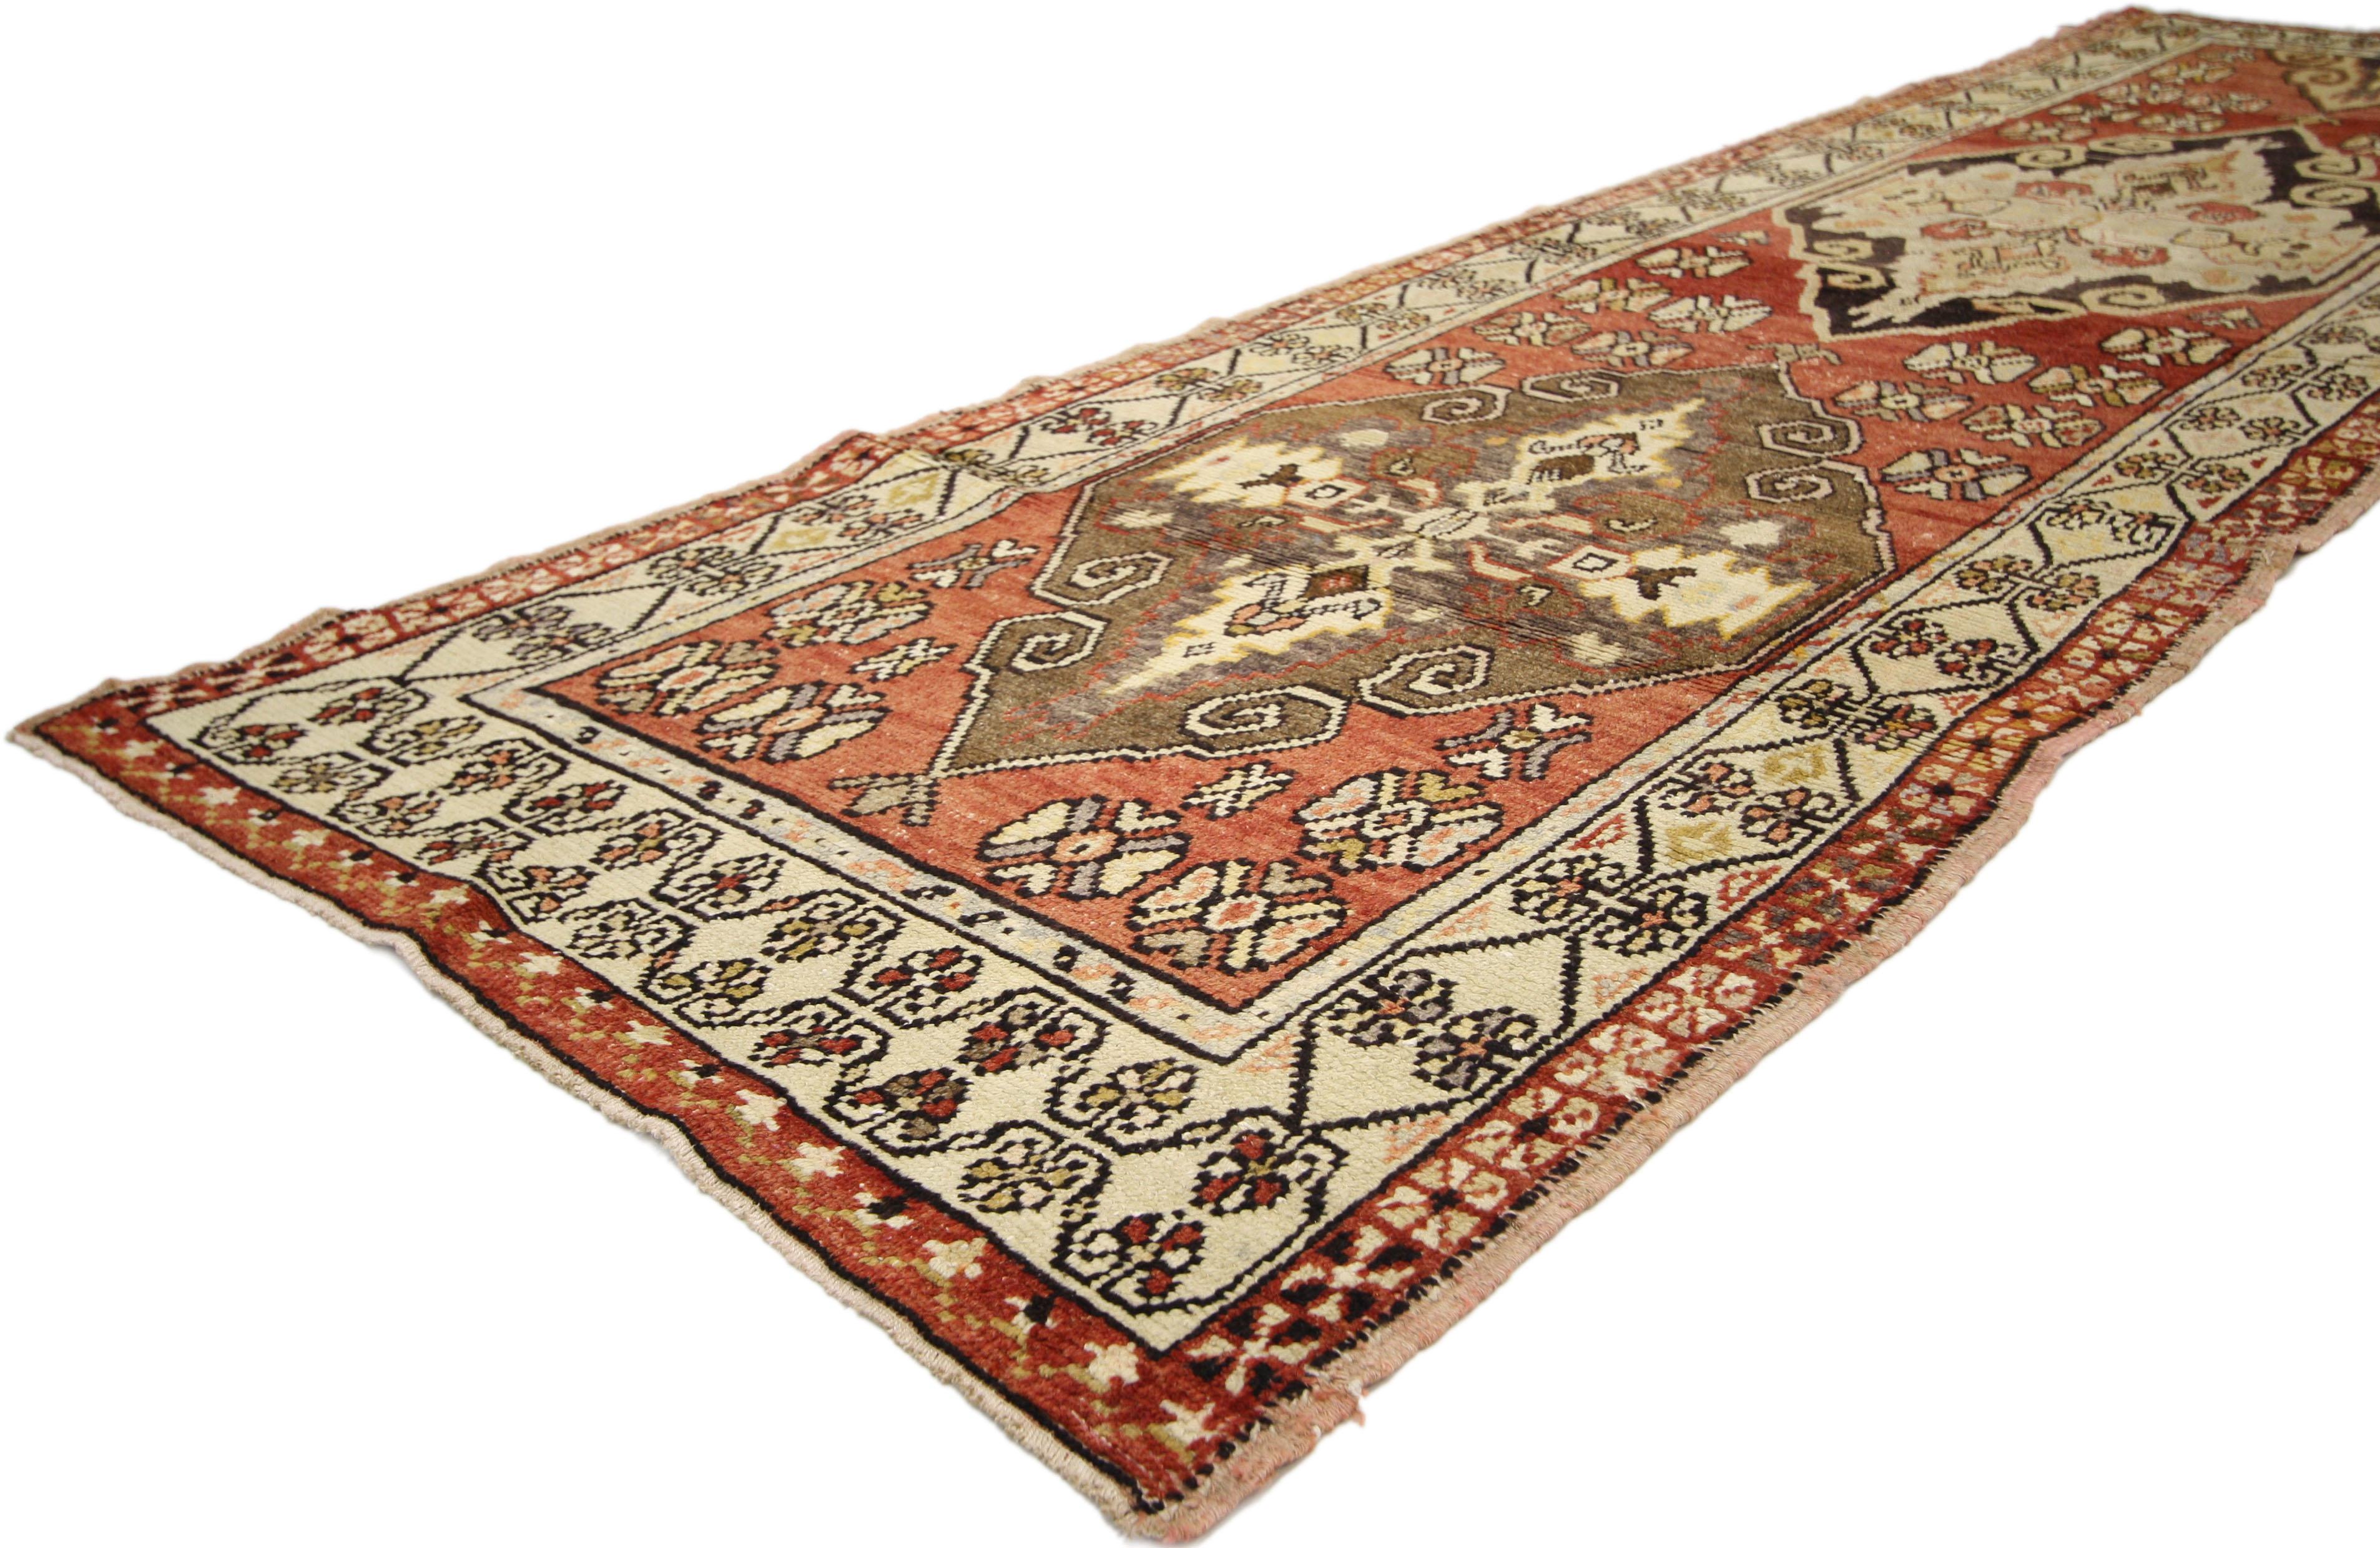 50107, vintage Turkish Oushak rug runner with traditional style. This tribal patterned Oushak runner features a double diamond lozenge design in opposite color palettes of muted crimson red, espresso, mocha brown and creamy-beige. Each lozenge